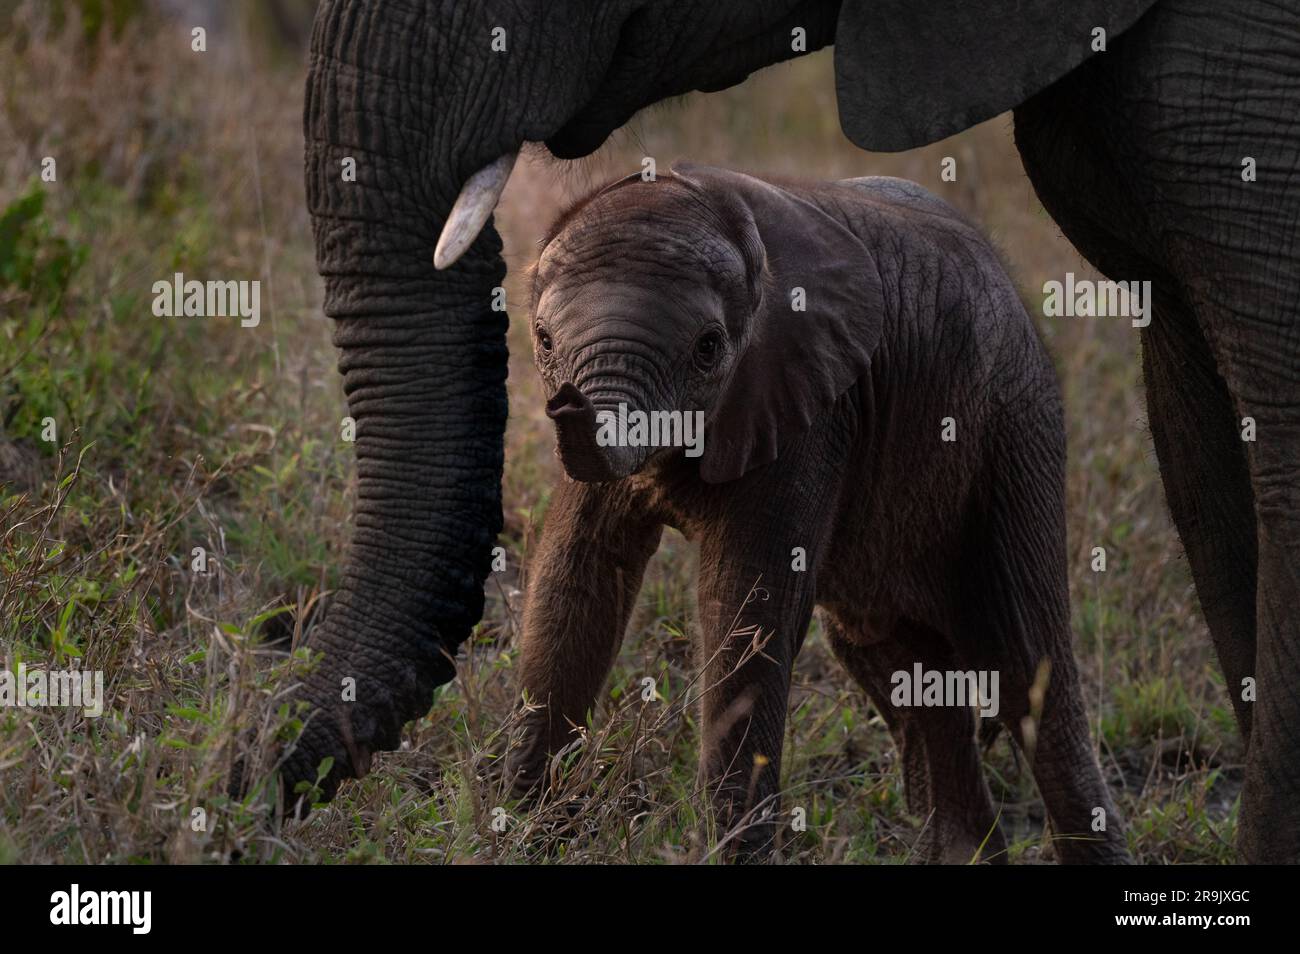 A baby elephant, Loxodonta africana, framed by its mother. Stock Photo